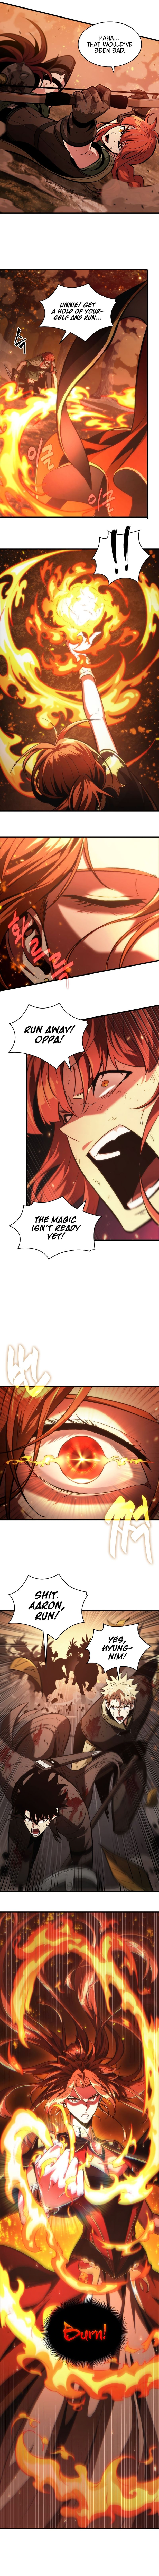 Pick Me Up Chapter 23 page 7